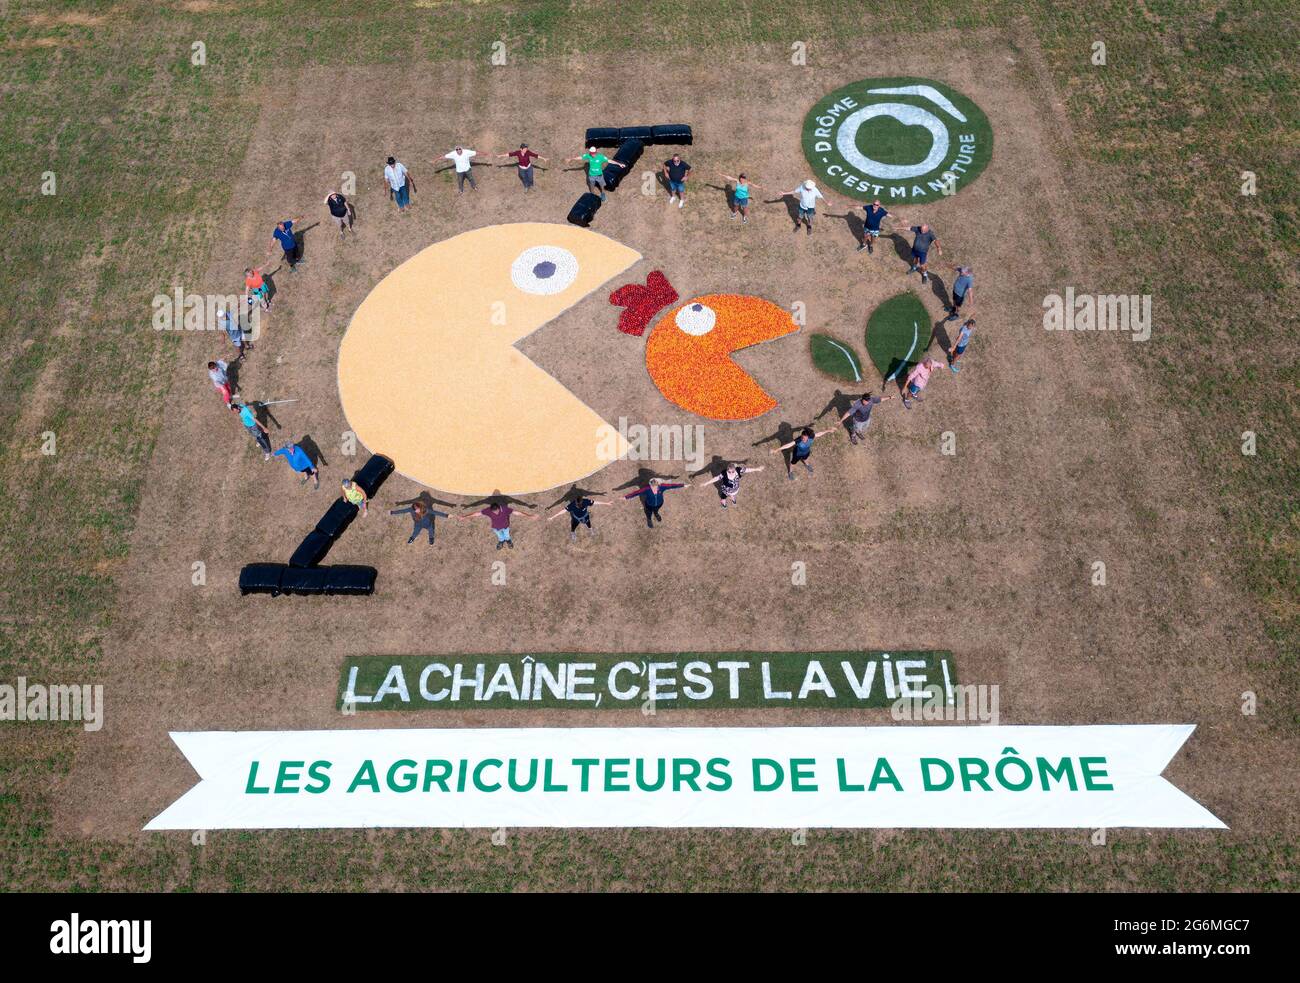 France, July 6, 2021,  Charpey (26), July 6, 2021: aerial view of a fresco produced by Drôme farmers during the 2021 Tour de France, Drômec's slogan, it's my nature, the chain, it's life and drawing of Pac- Man. Photo by Delmarty J/ANDBZ/ABACAPRESS.COM Stock Photo